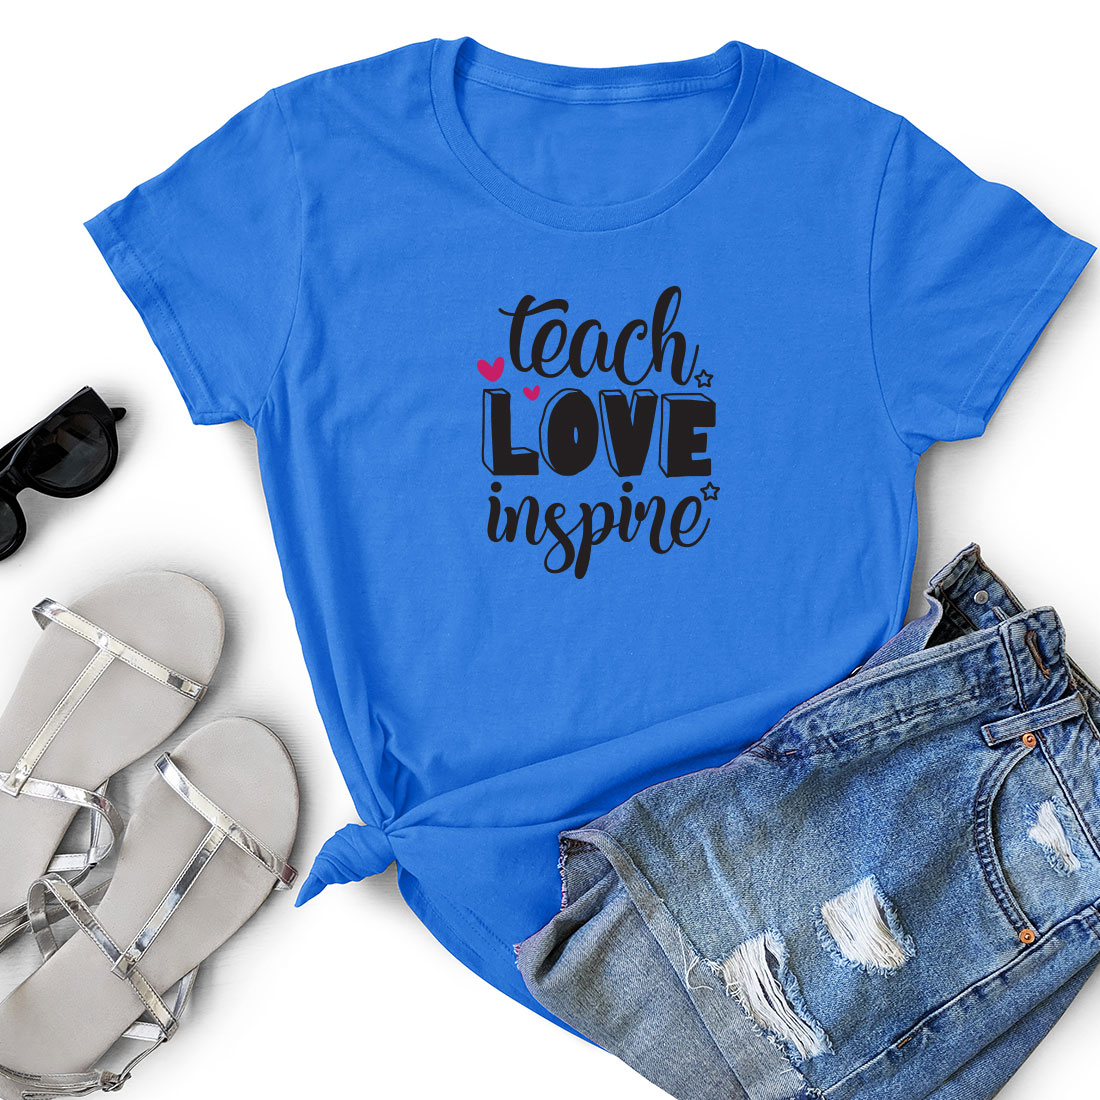 T - shirt that says teach love inspire next to a pair of shorts.